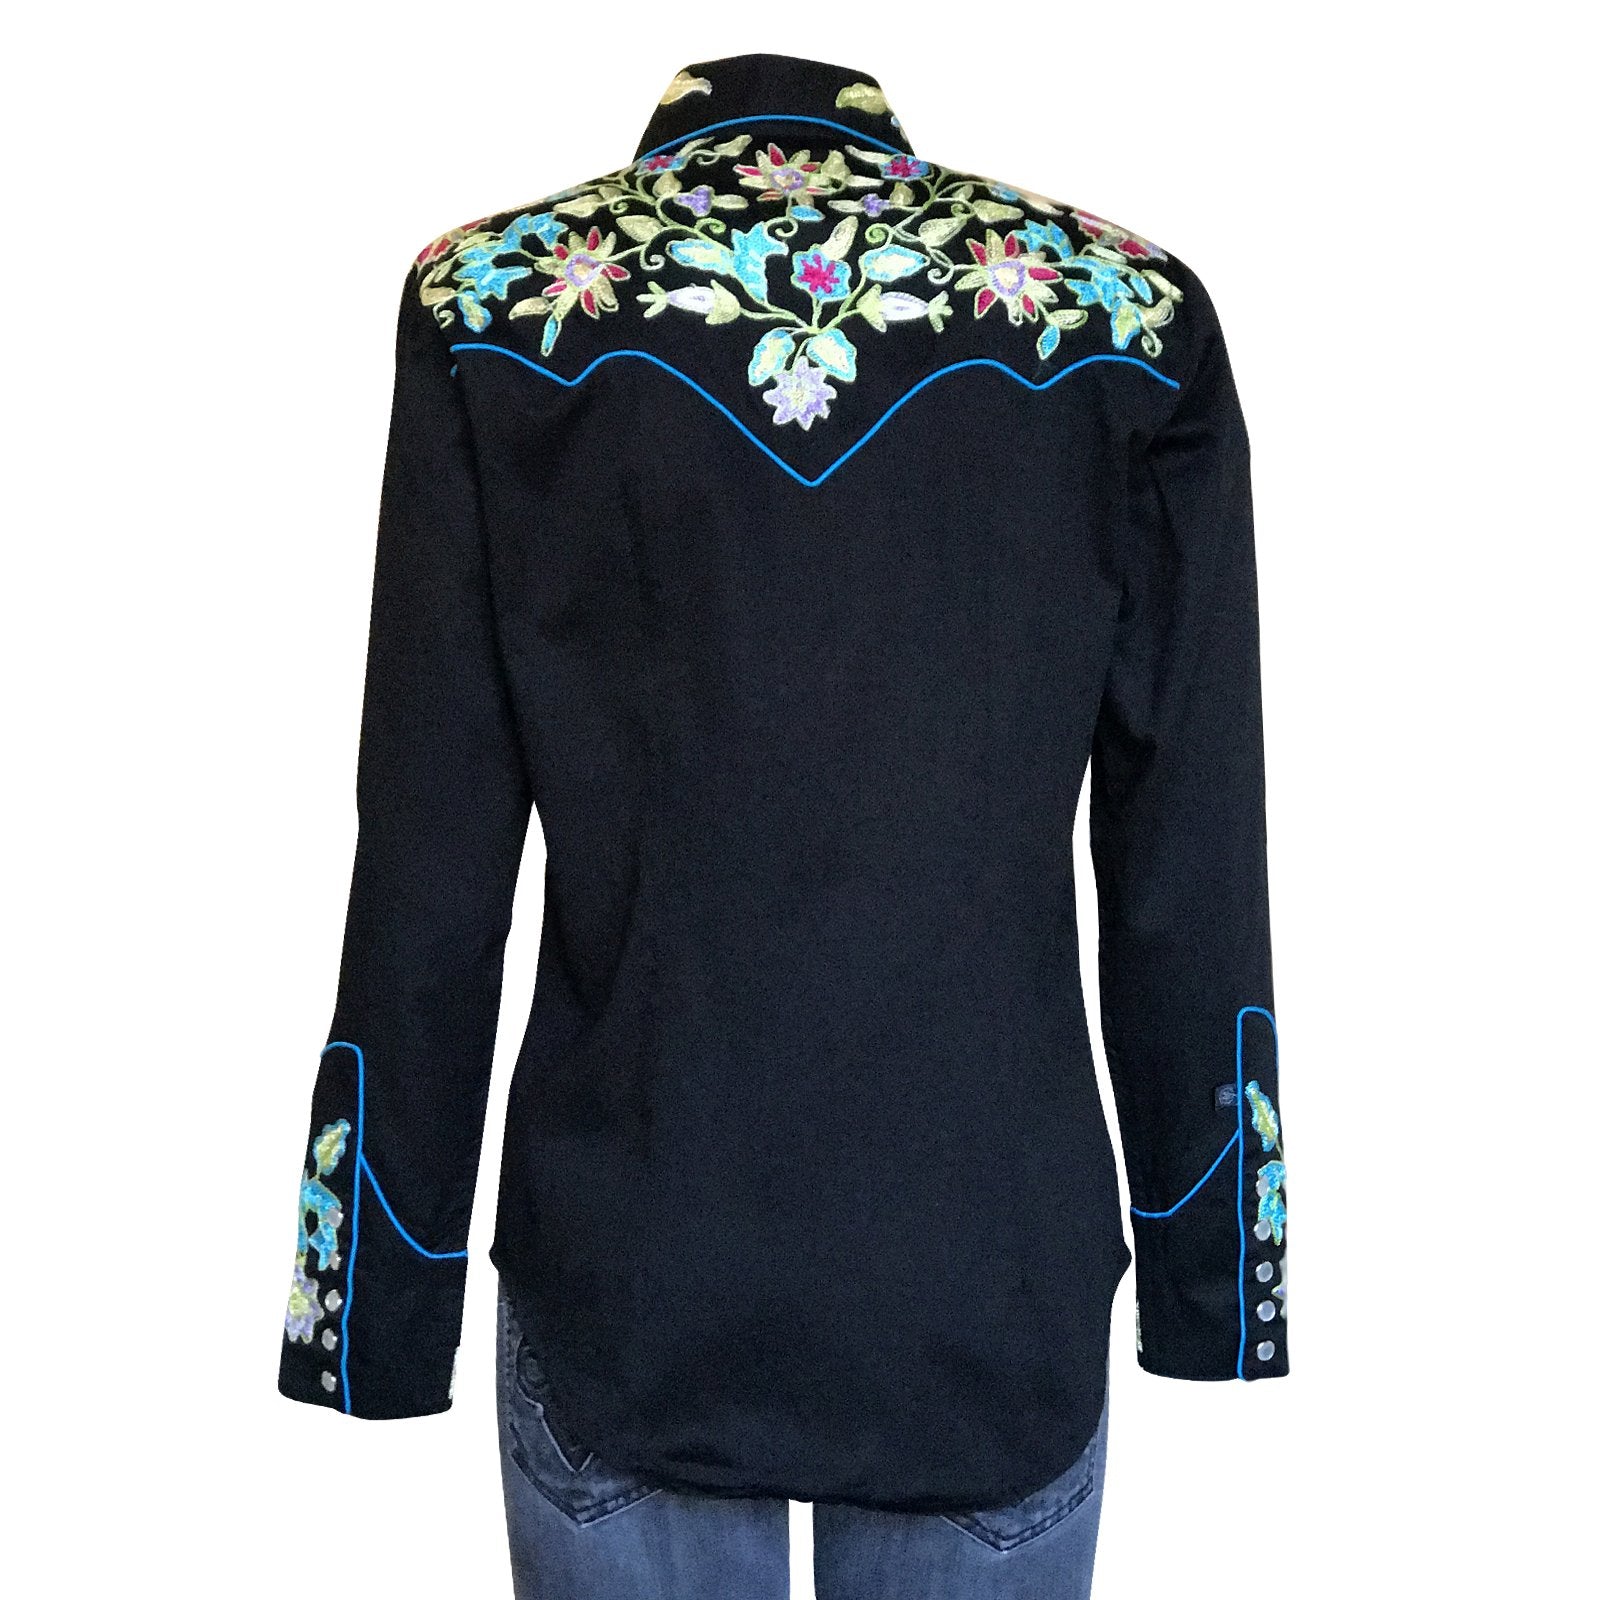 Vintage Inspired Western Shirt Ladies Rockmount Floral Embroidery Black Front on Mannequin